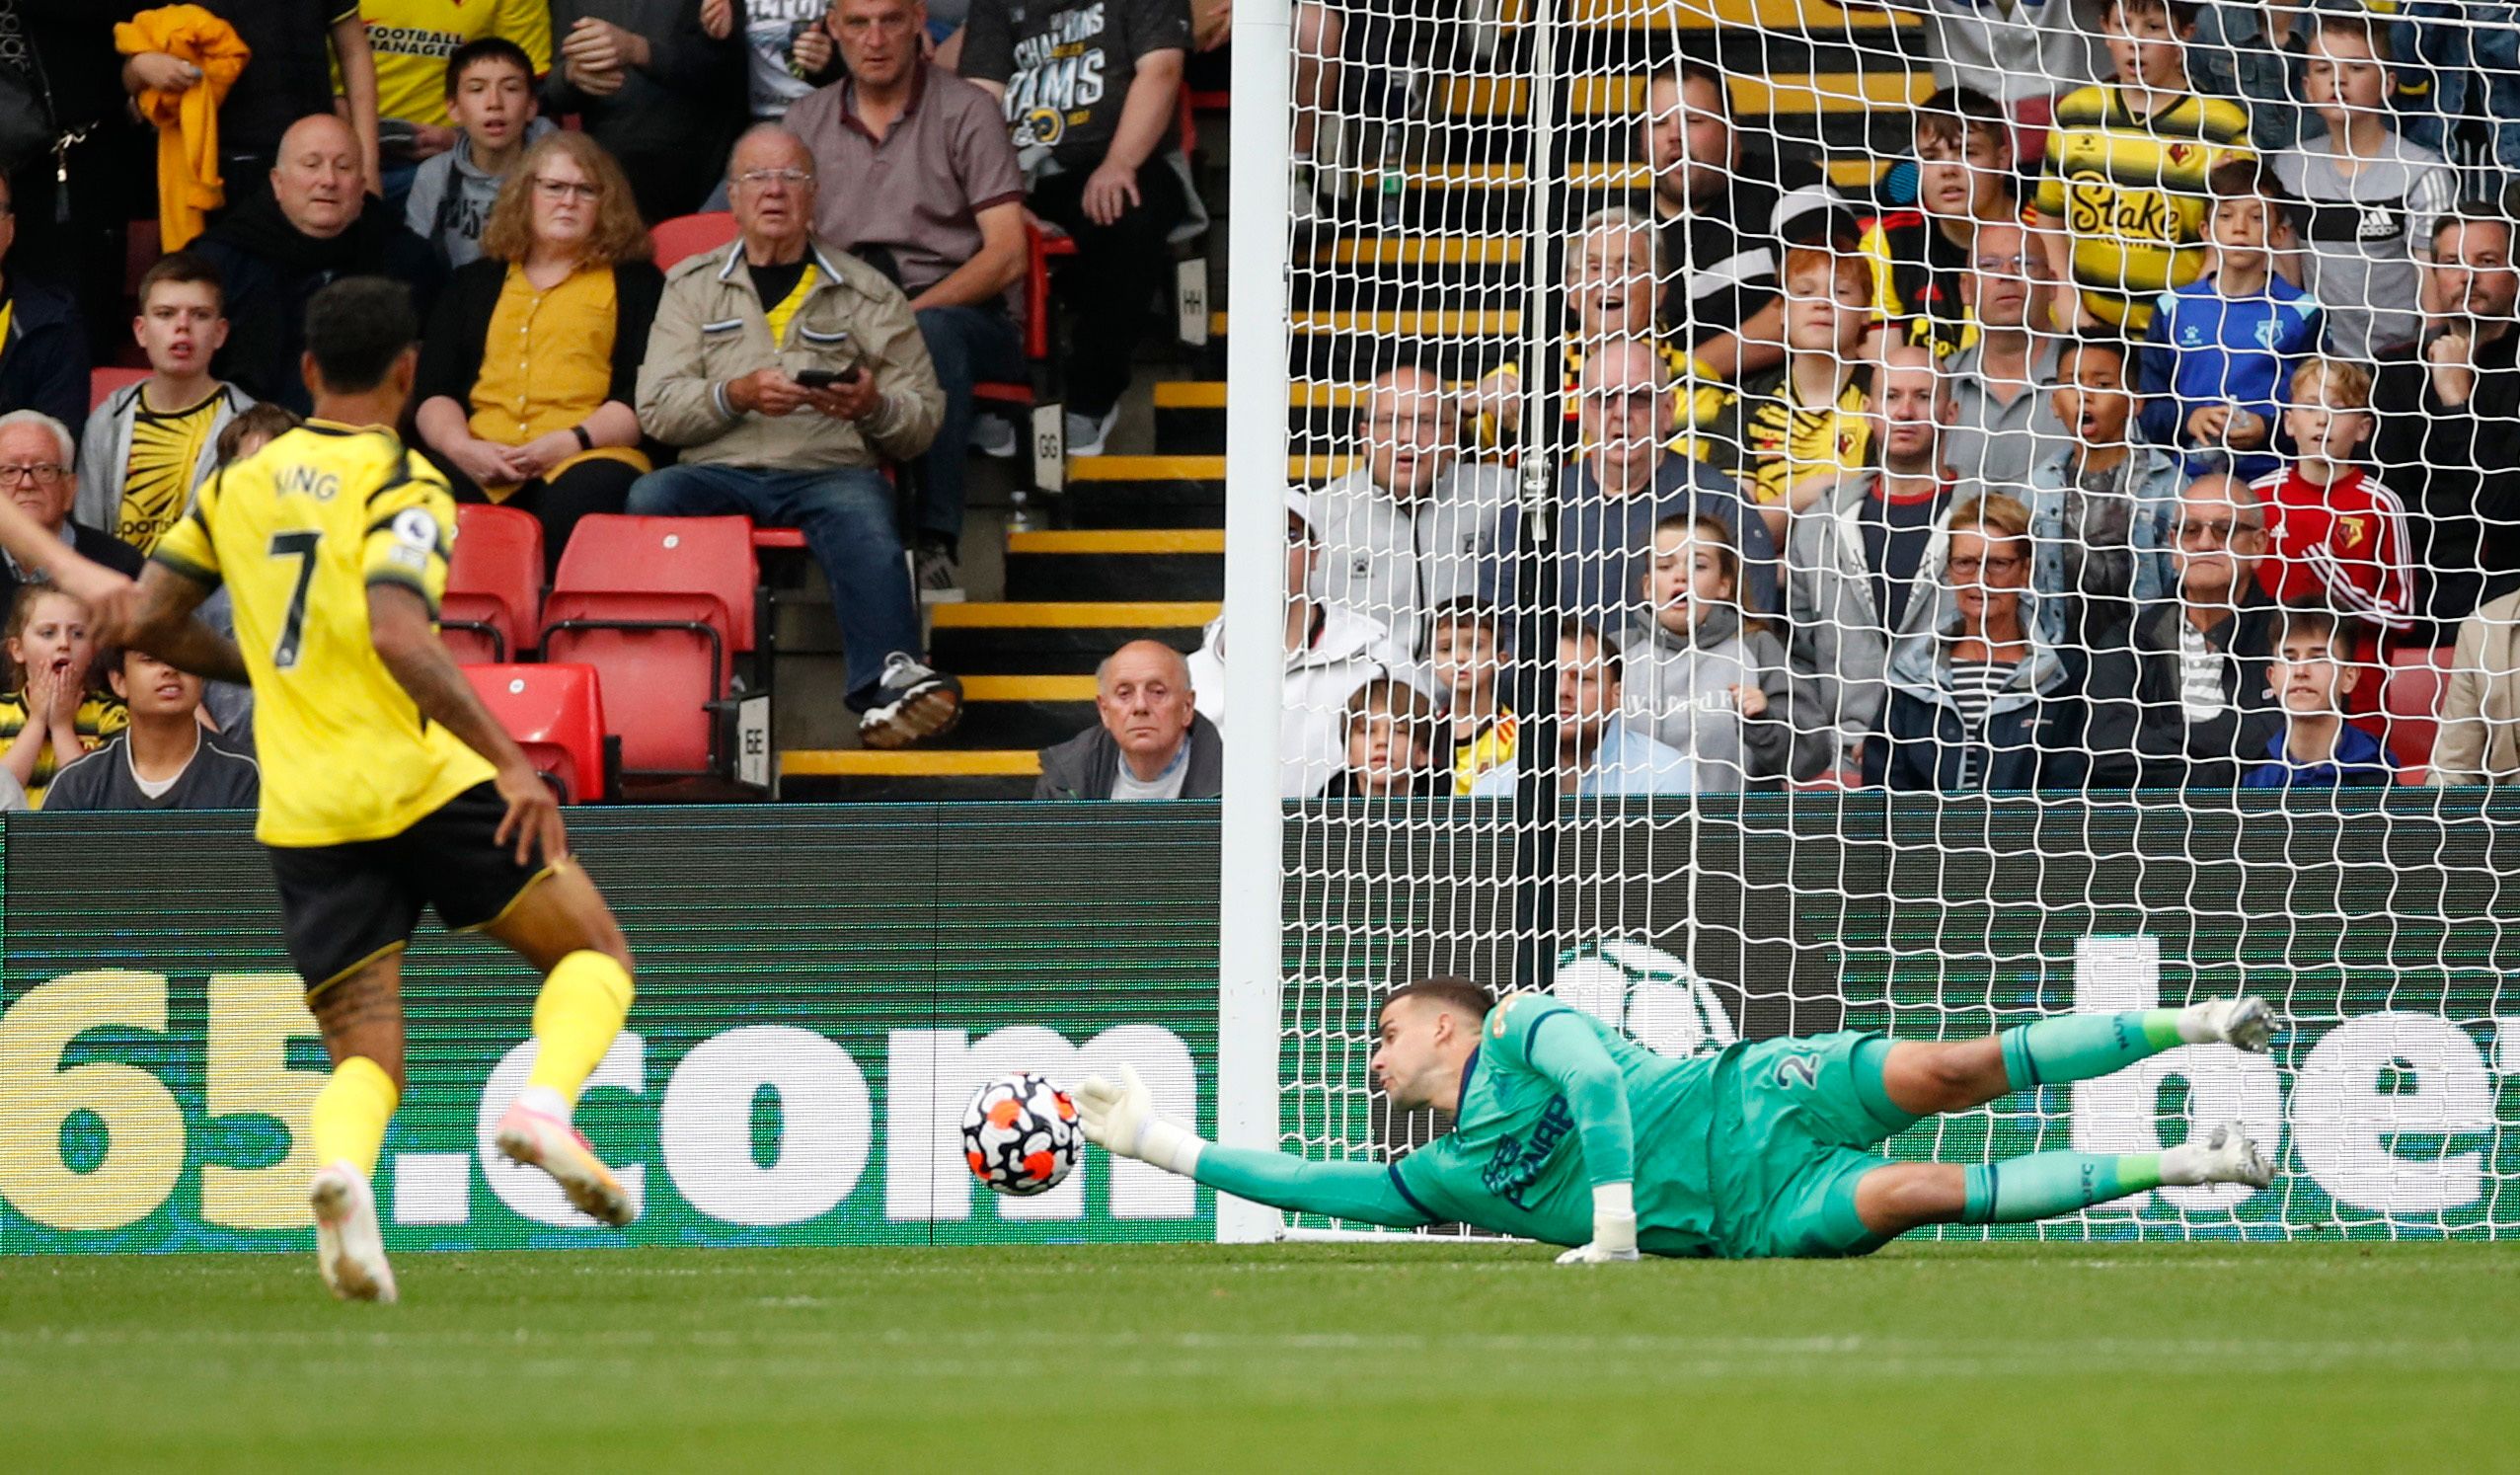 Soccer Football - Premier League - Watford v Newcastle United - Vicarage Road, Watford, Britain - September 25, 2021 Newcastle United's Karl Darlow makes a save Action Images via Reuters/Andrew Boyers EDITORIAL USE ONLY. No use with unauthorized audio, video, data, fixture lists, club/league logos or 'live' services. Online in-match use limited to 75 images, no video emulation. No use in betting, games or single club /league/player publications.  Please contact your account representative for fu